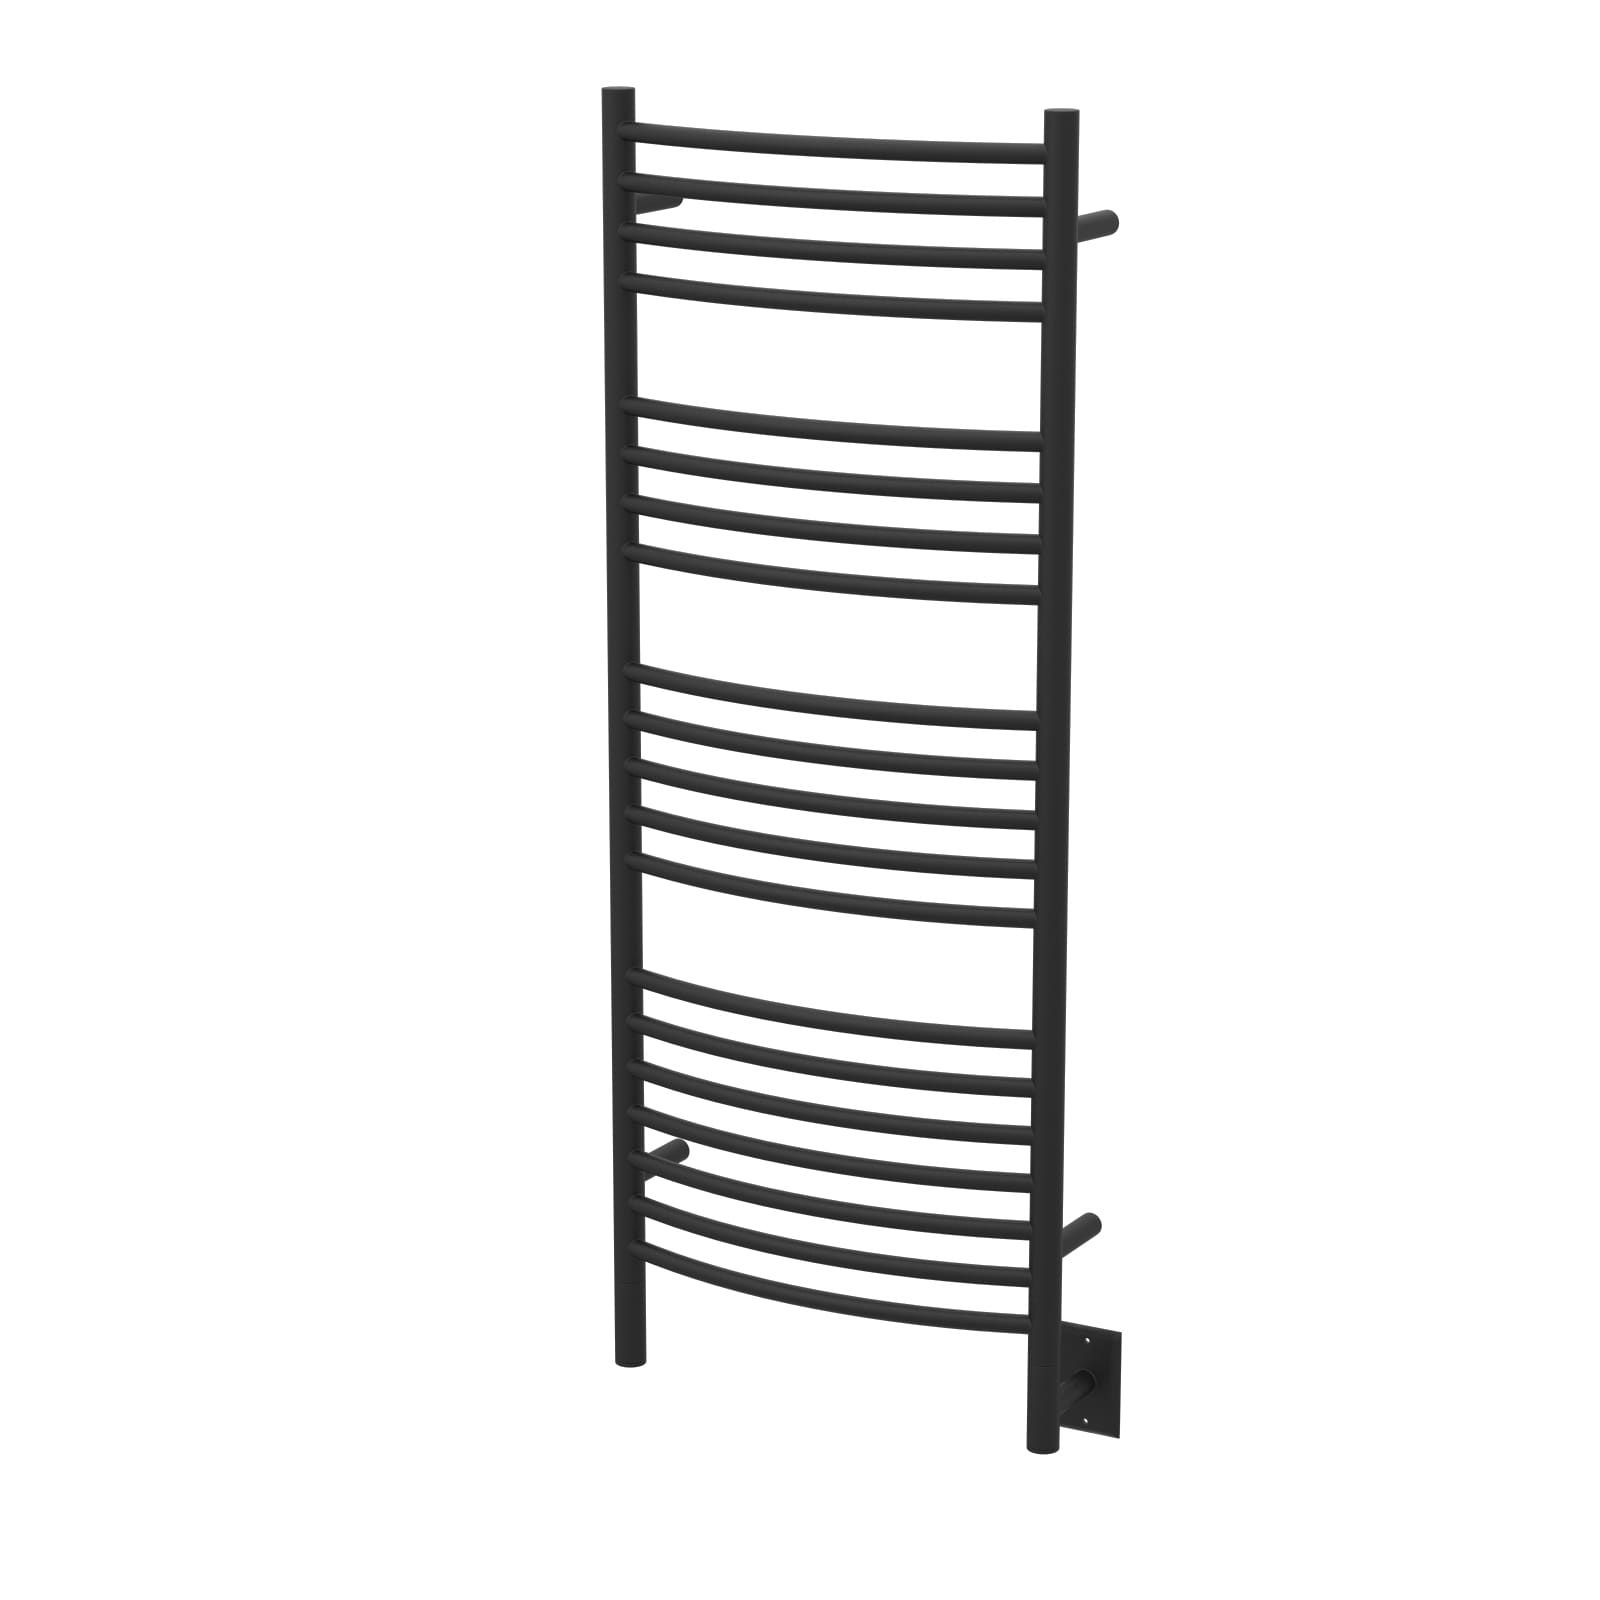 Amba, Amba Jeeves DCMB Curved Towel Warmer with 20 Bars, Matte Black Finish